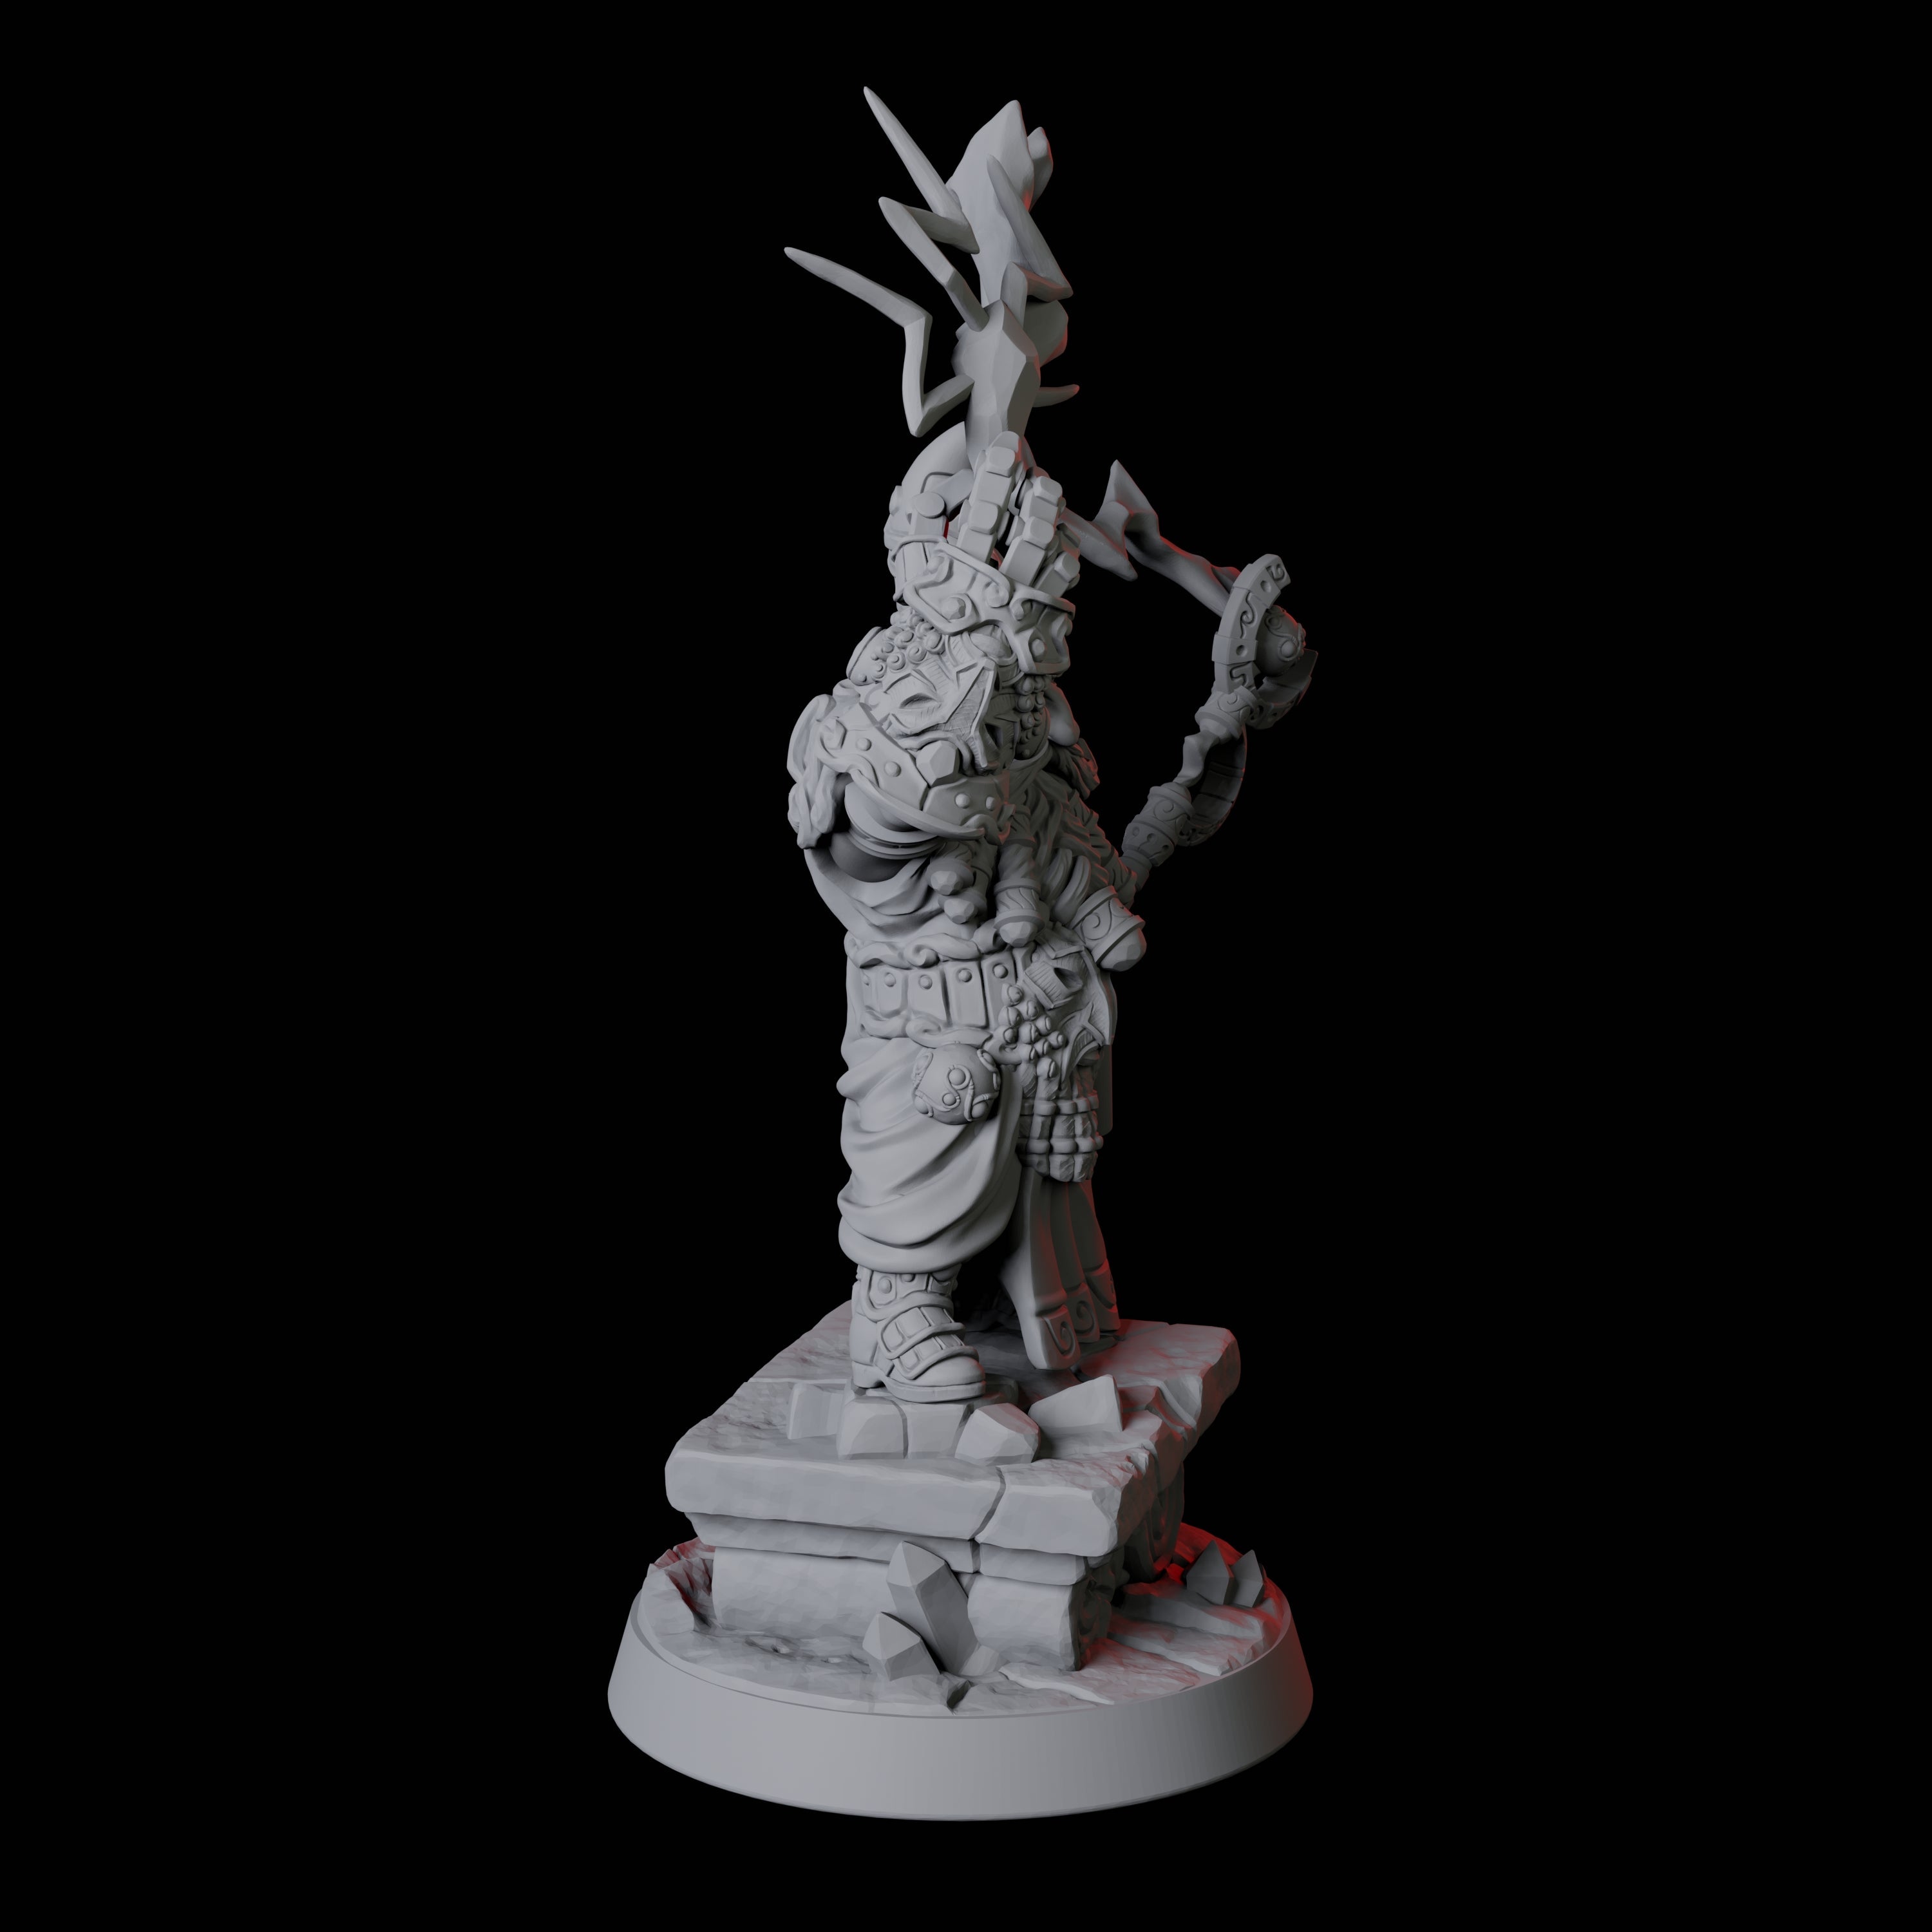 Gnome King Miniature for Dungeons and Dragons, Pathfinder or other TTRPGs